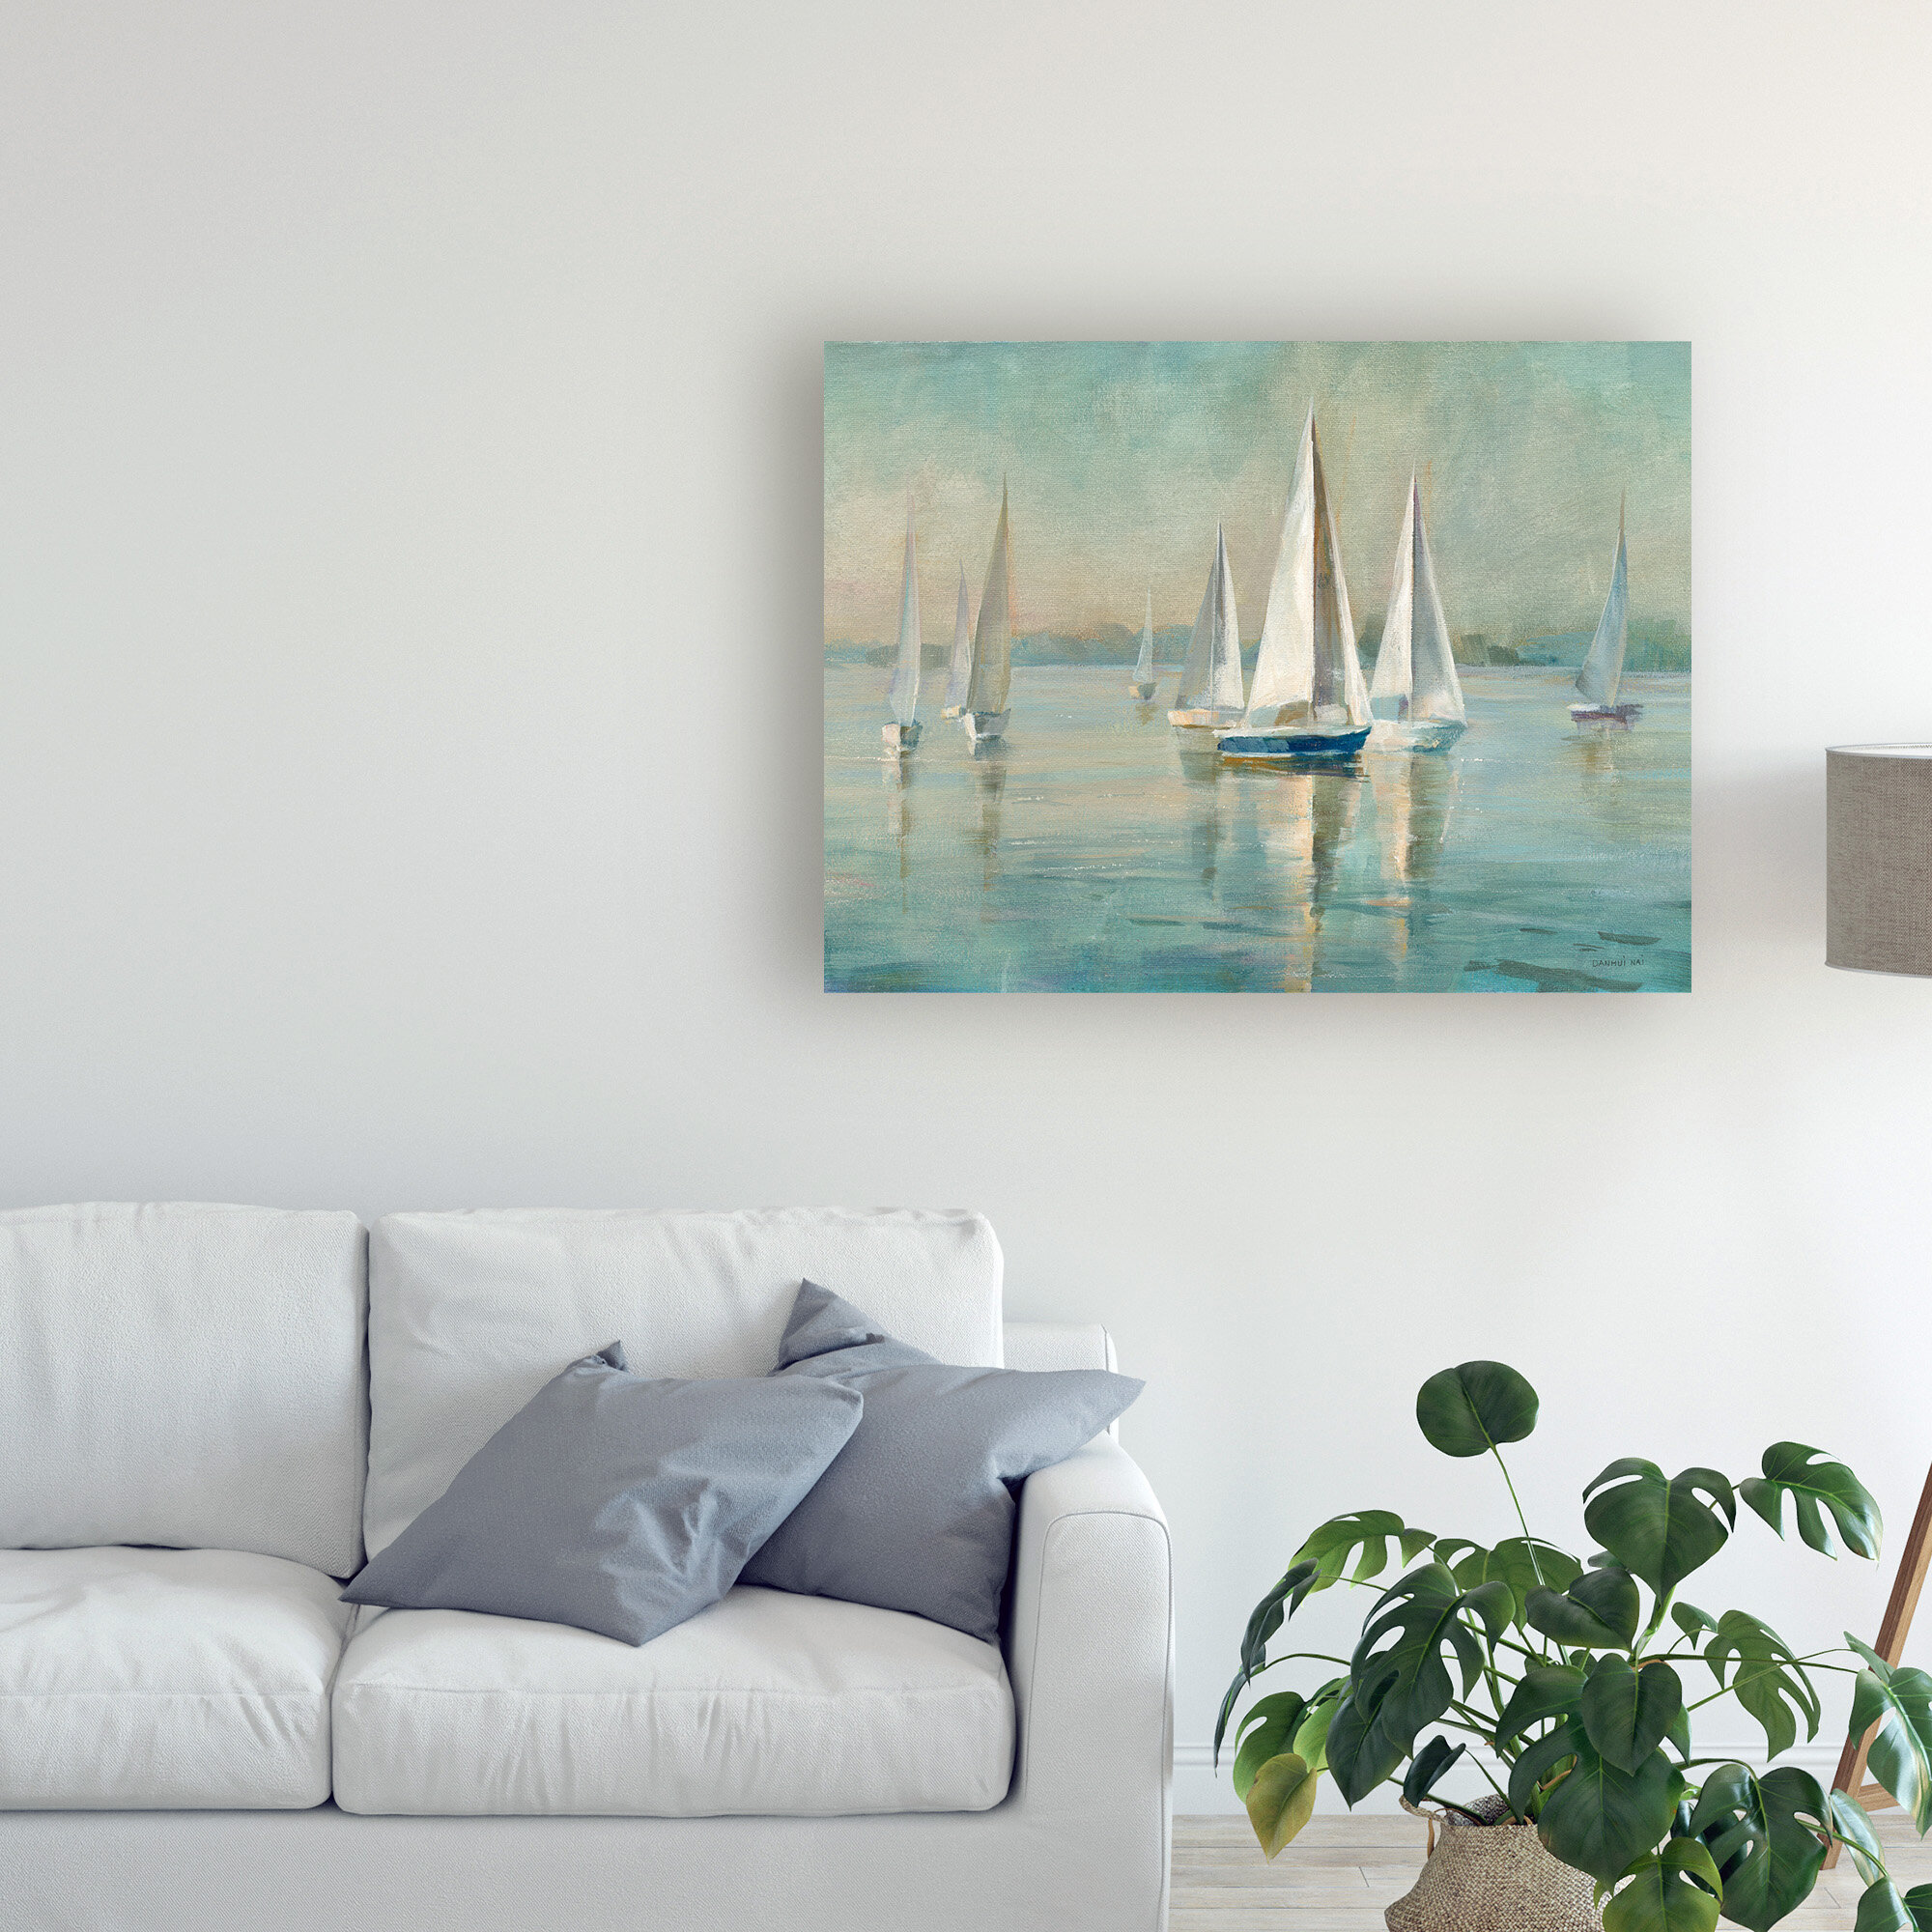 Dovecove Sailboats At Sunrise by Danhui Nai - Painting on Canvas | Wayfair